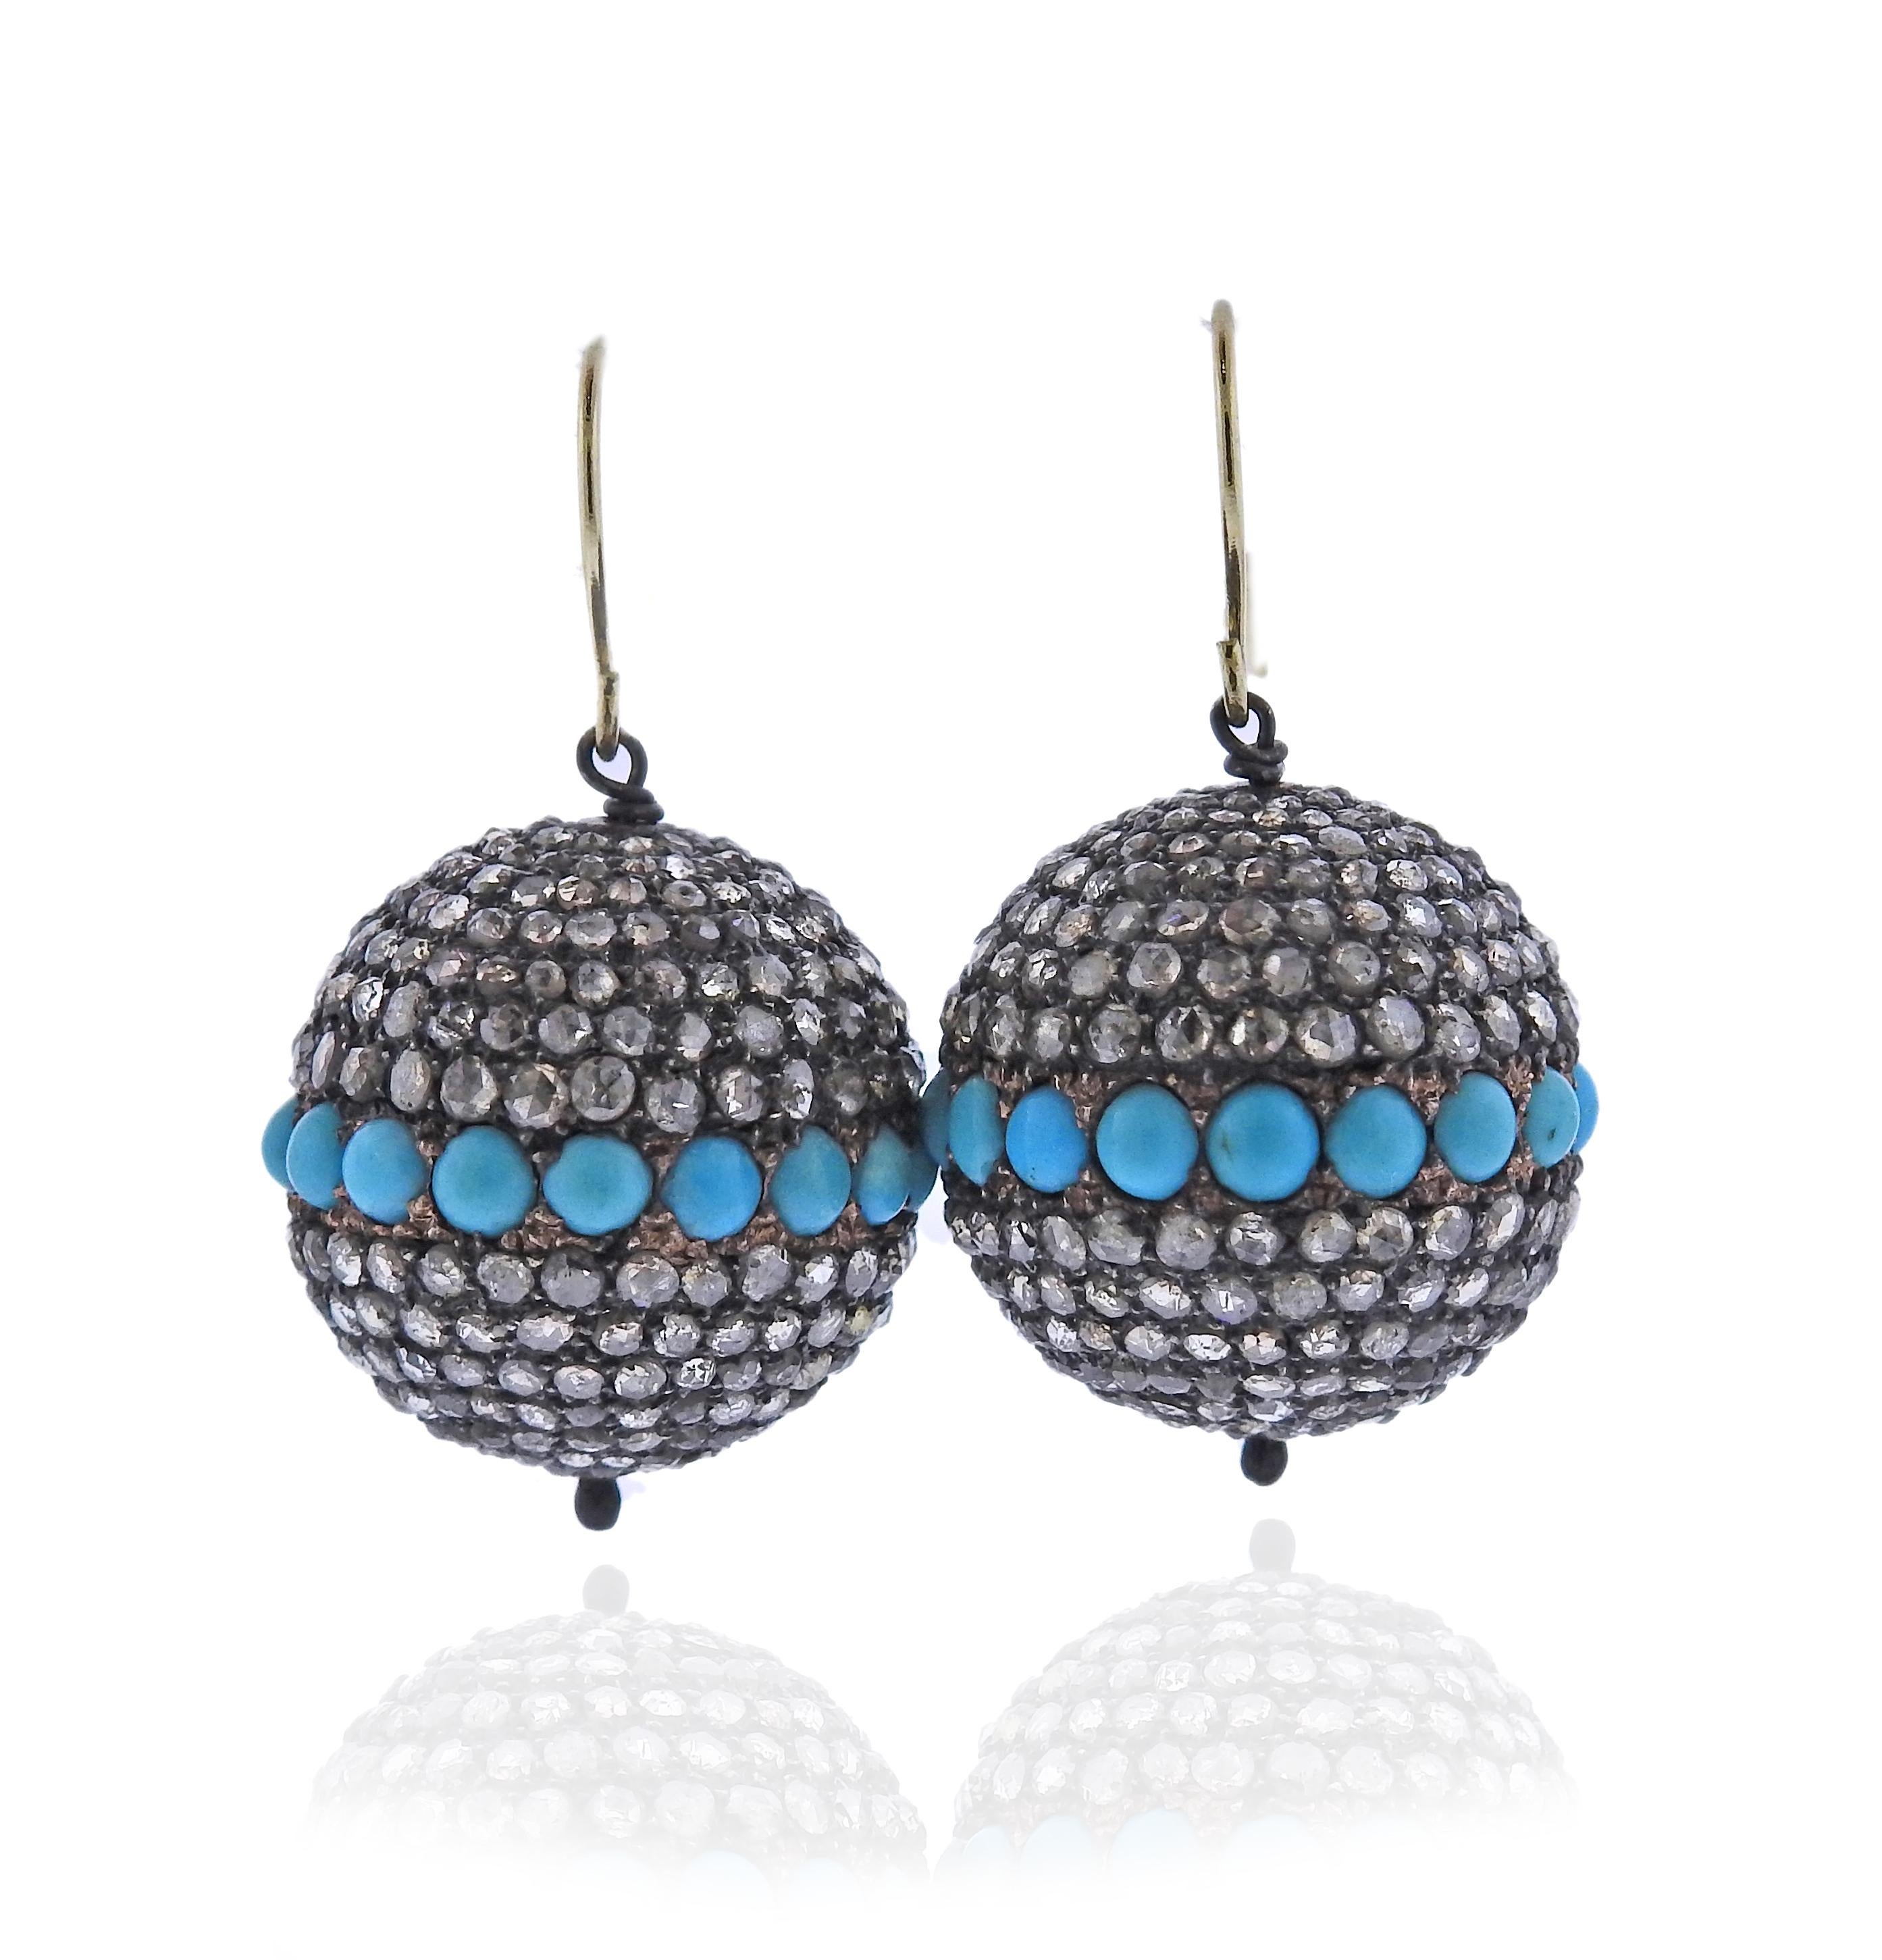 Pair of silver and 14k gold earrings with rose cut diamonds (one stone is missing) and turquoise. earrings are 33m m long, balls are 20mm in diameter. Weight 15.4 grams.